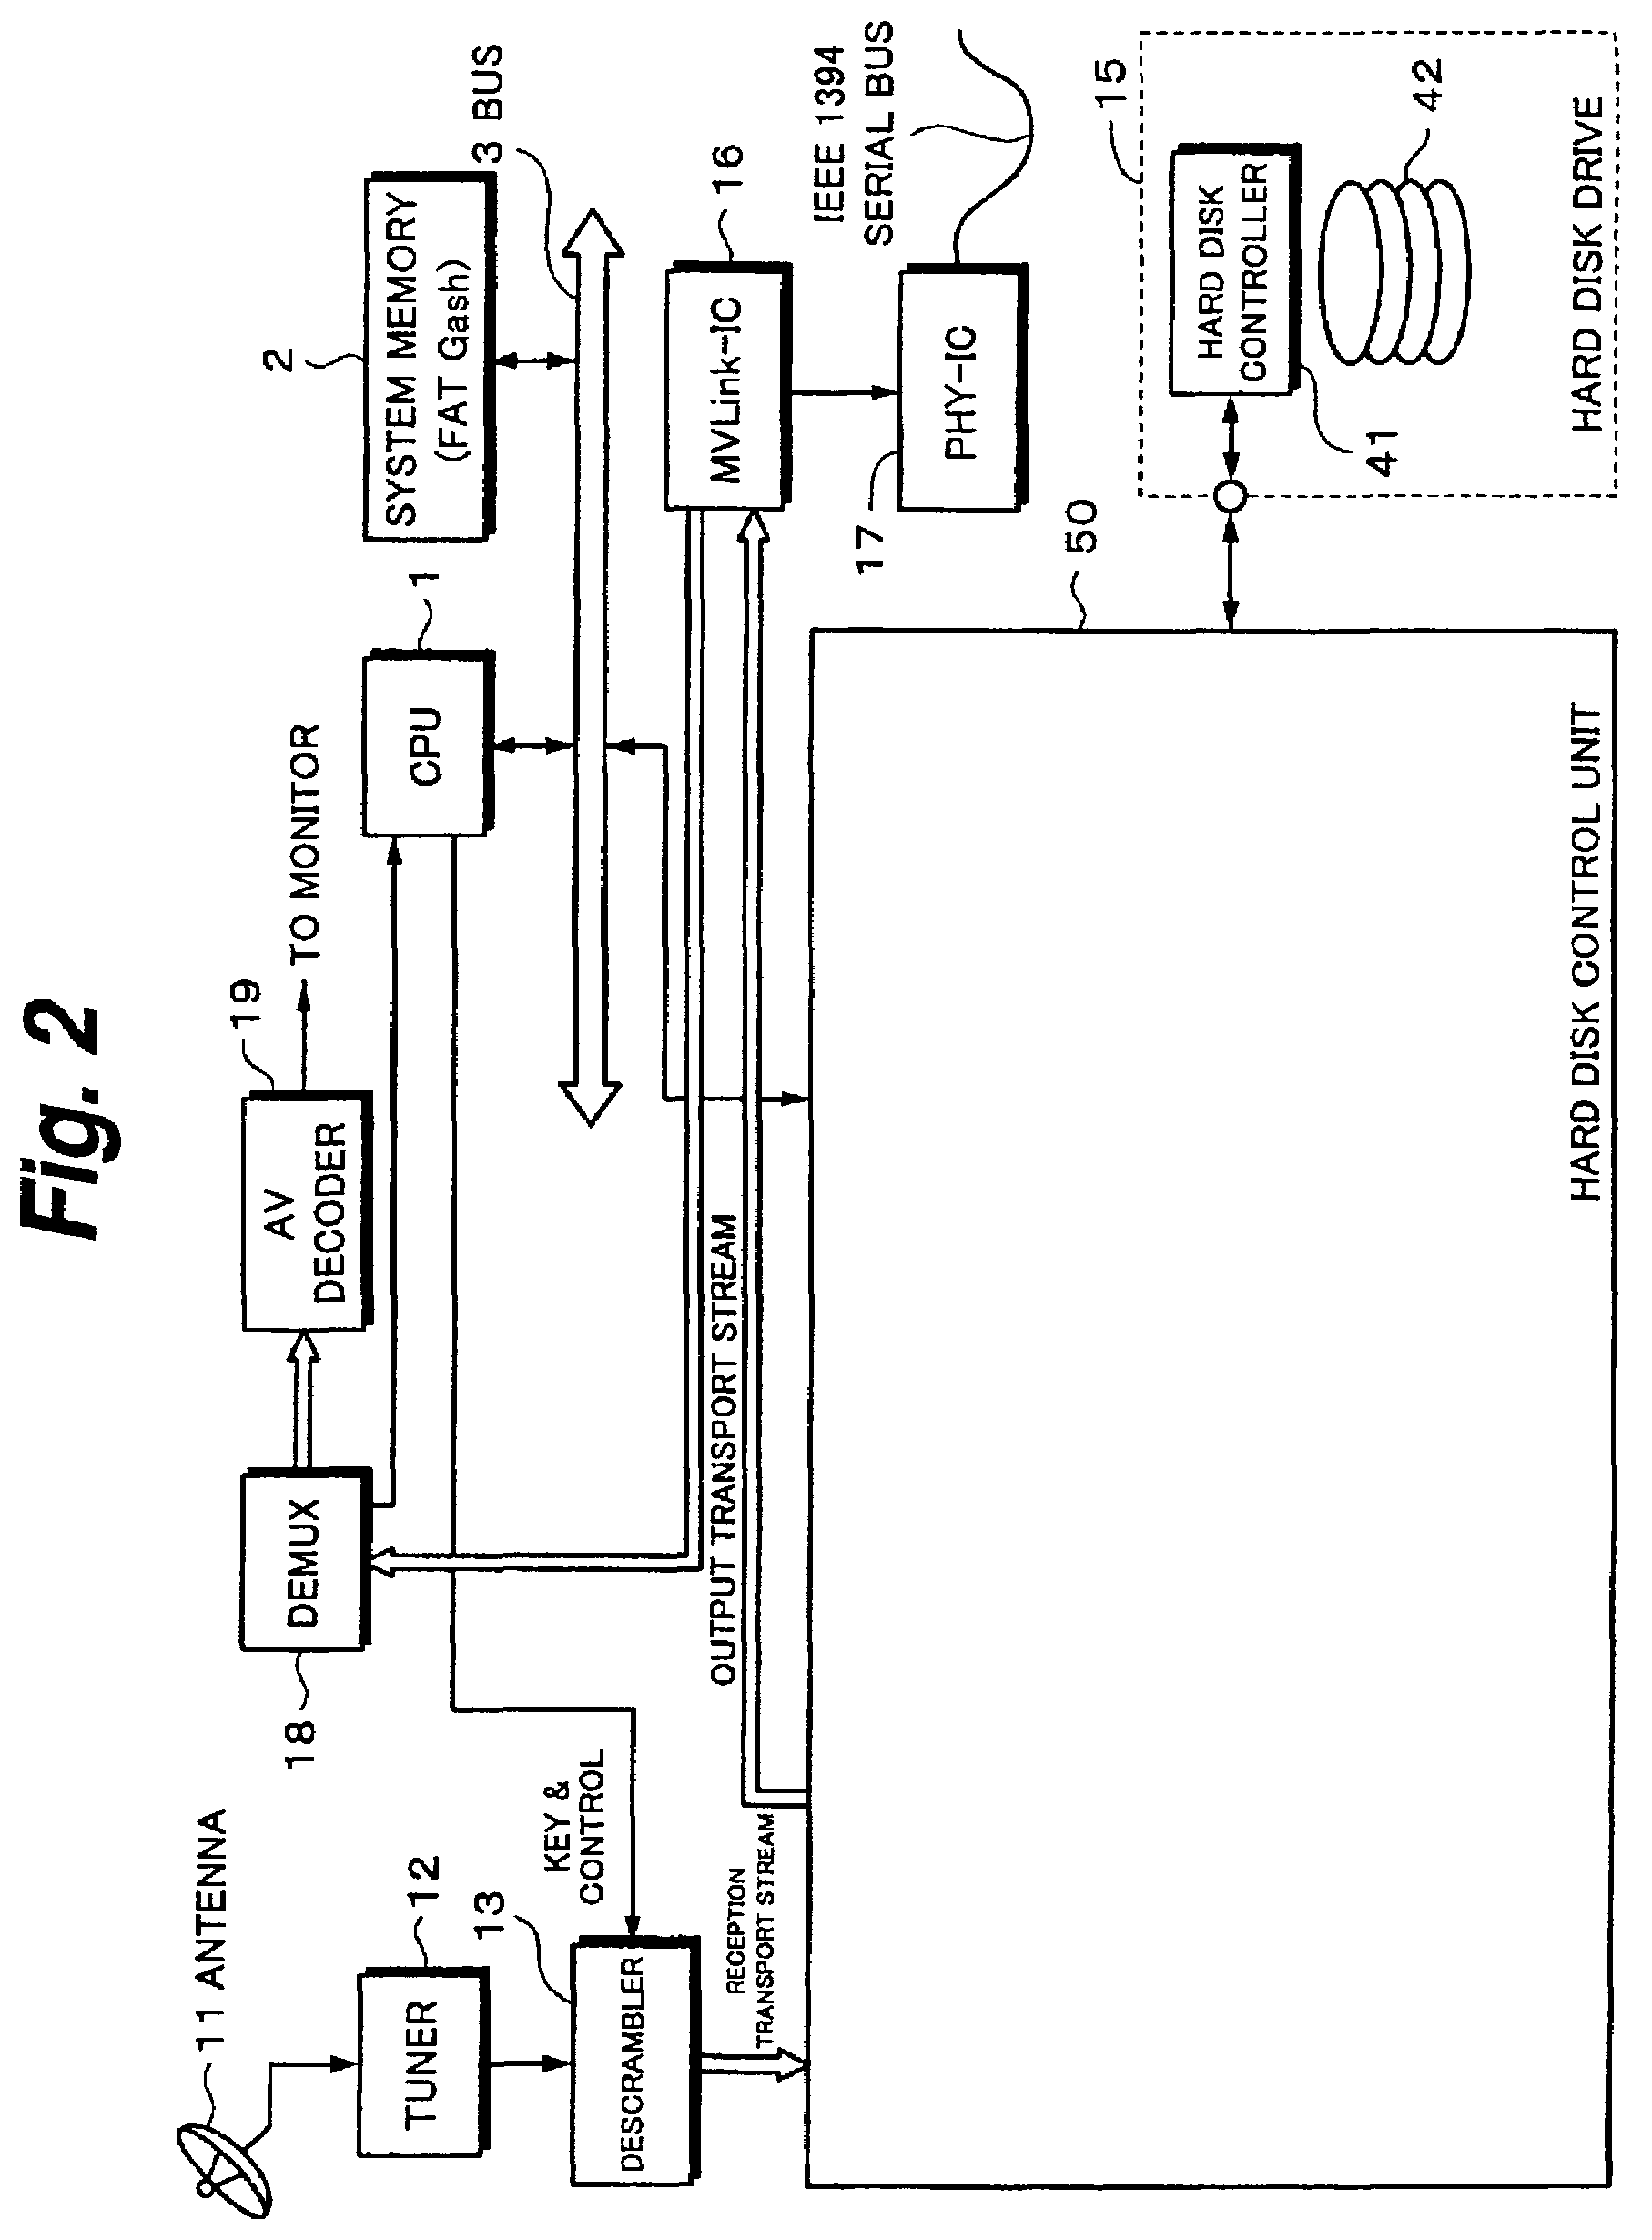 Information processing apparatus and method for handling packet streams